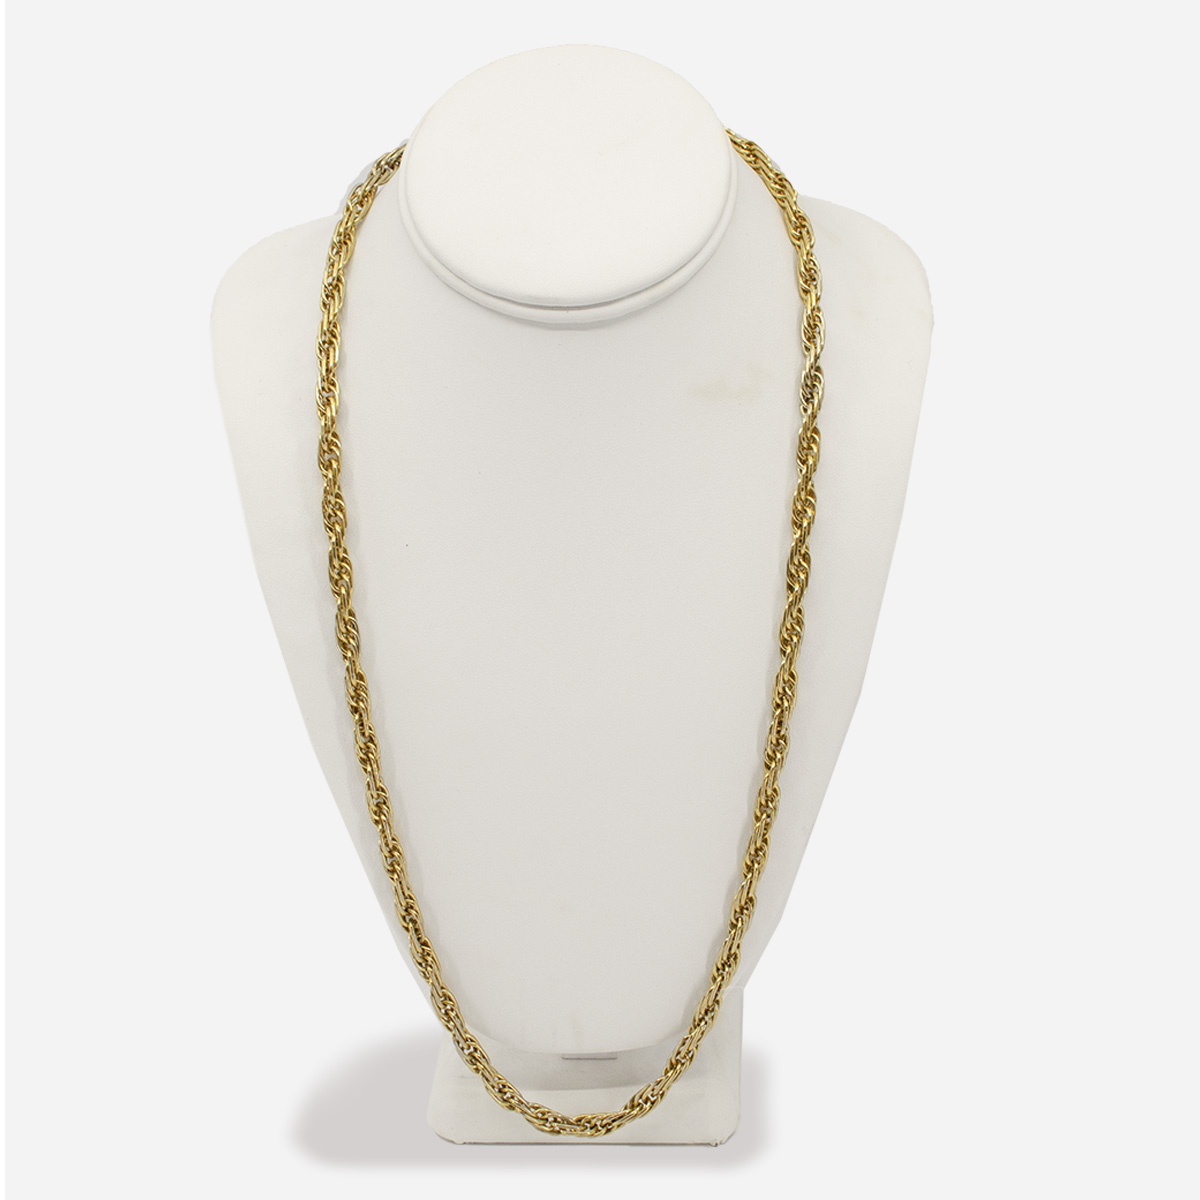 Whiting and davis chain necklace